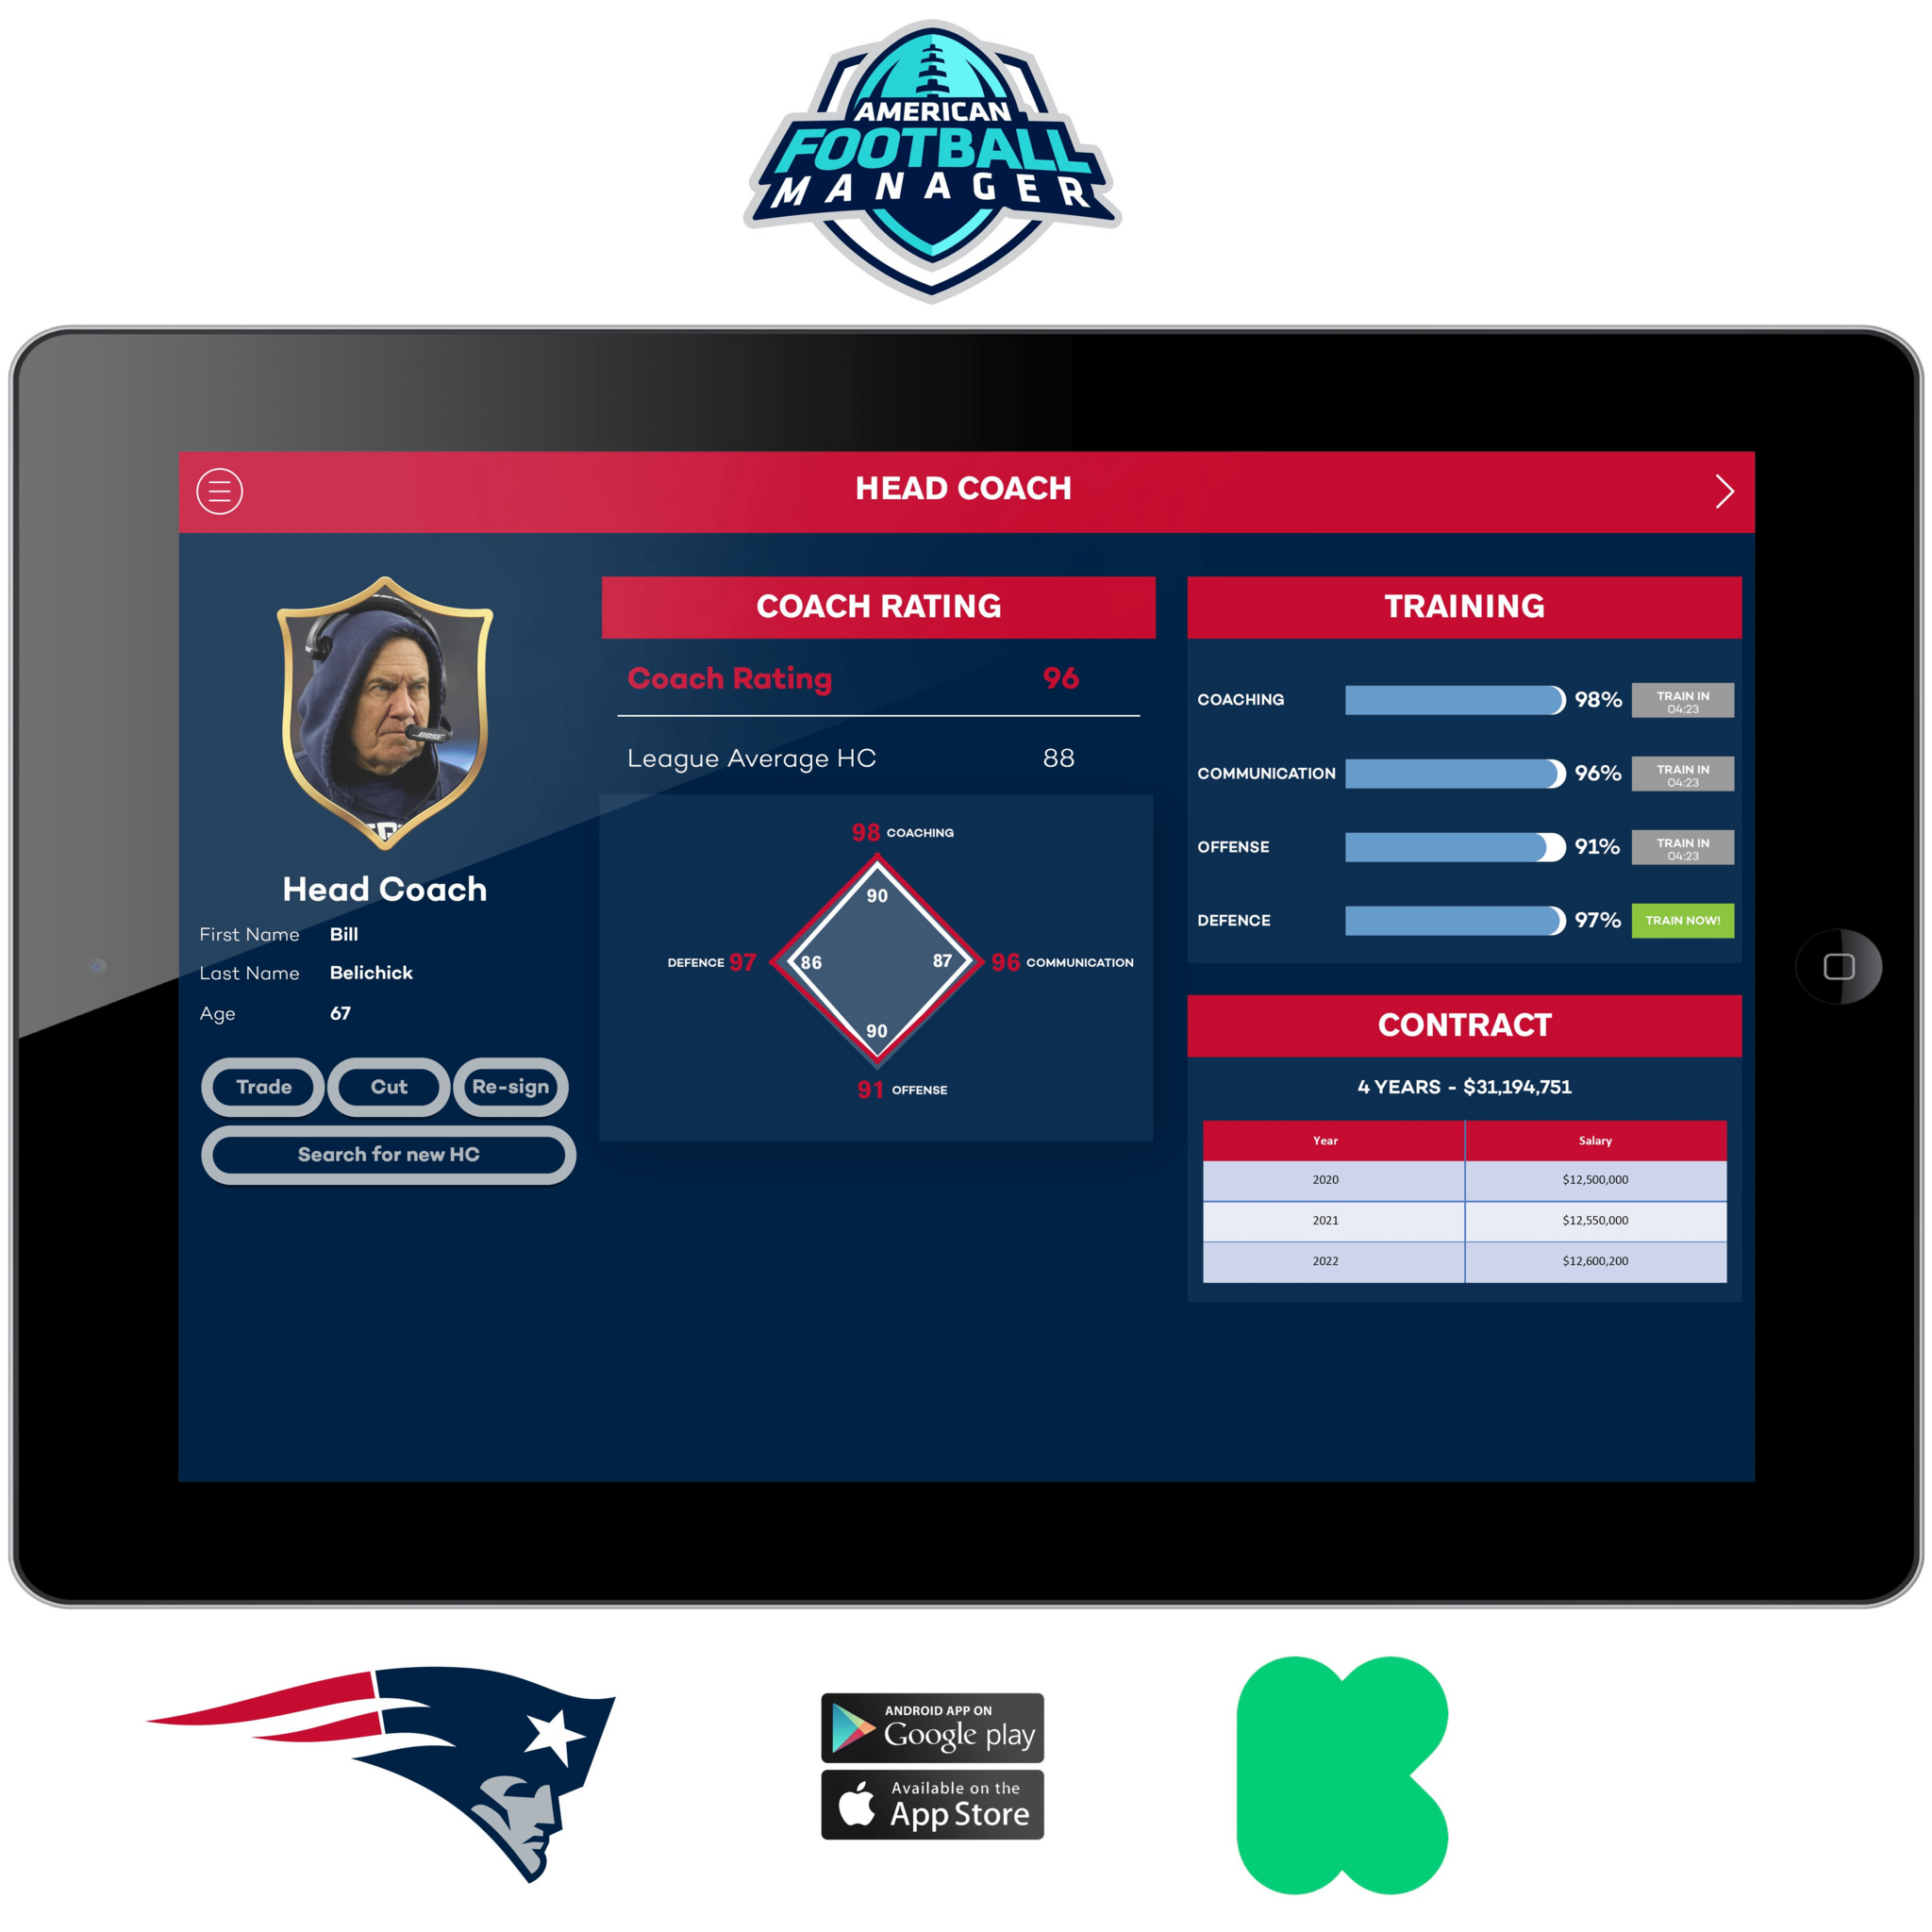 Images - American Football Manager - GM Games - Sports General Manager